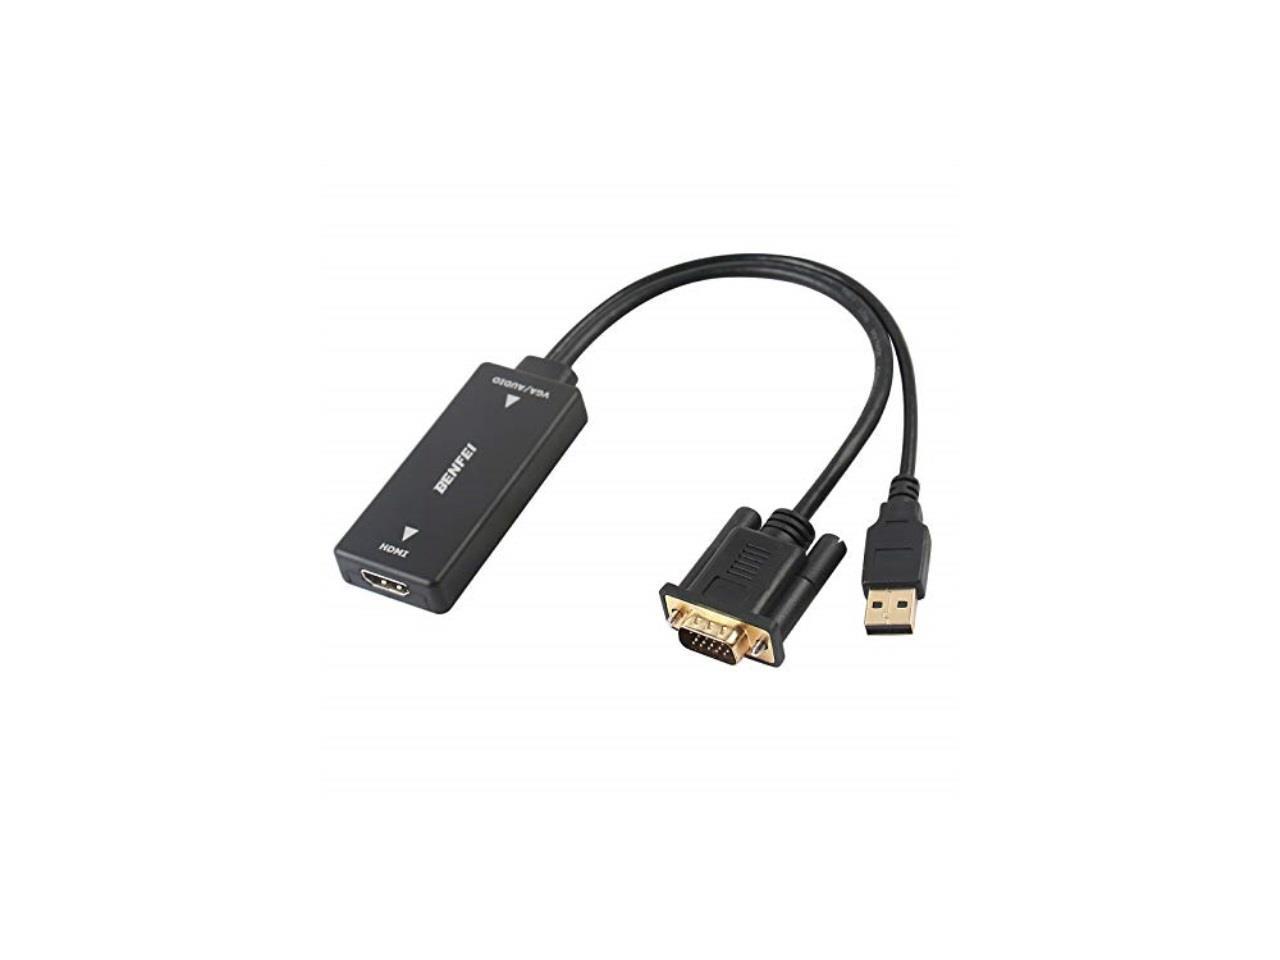 Armoedig leeg Omgaan met vga to hdmi, benfei vga input to hdmi ouput adapter with audio support and  1080p resolution - Newegg.com